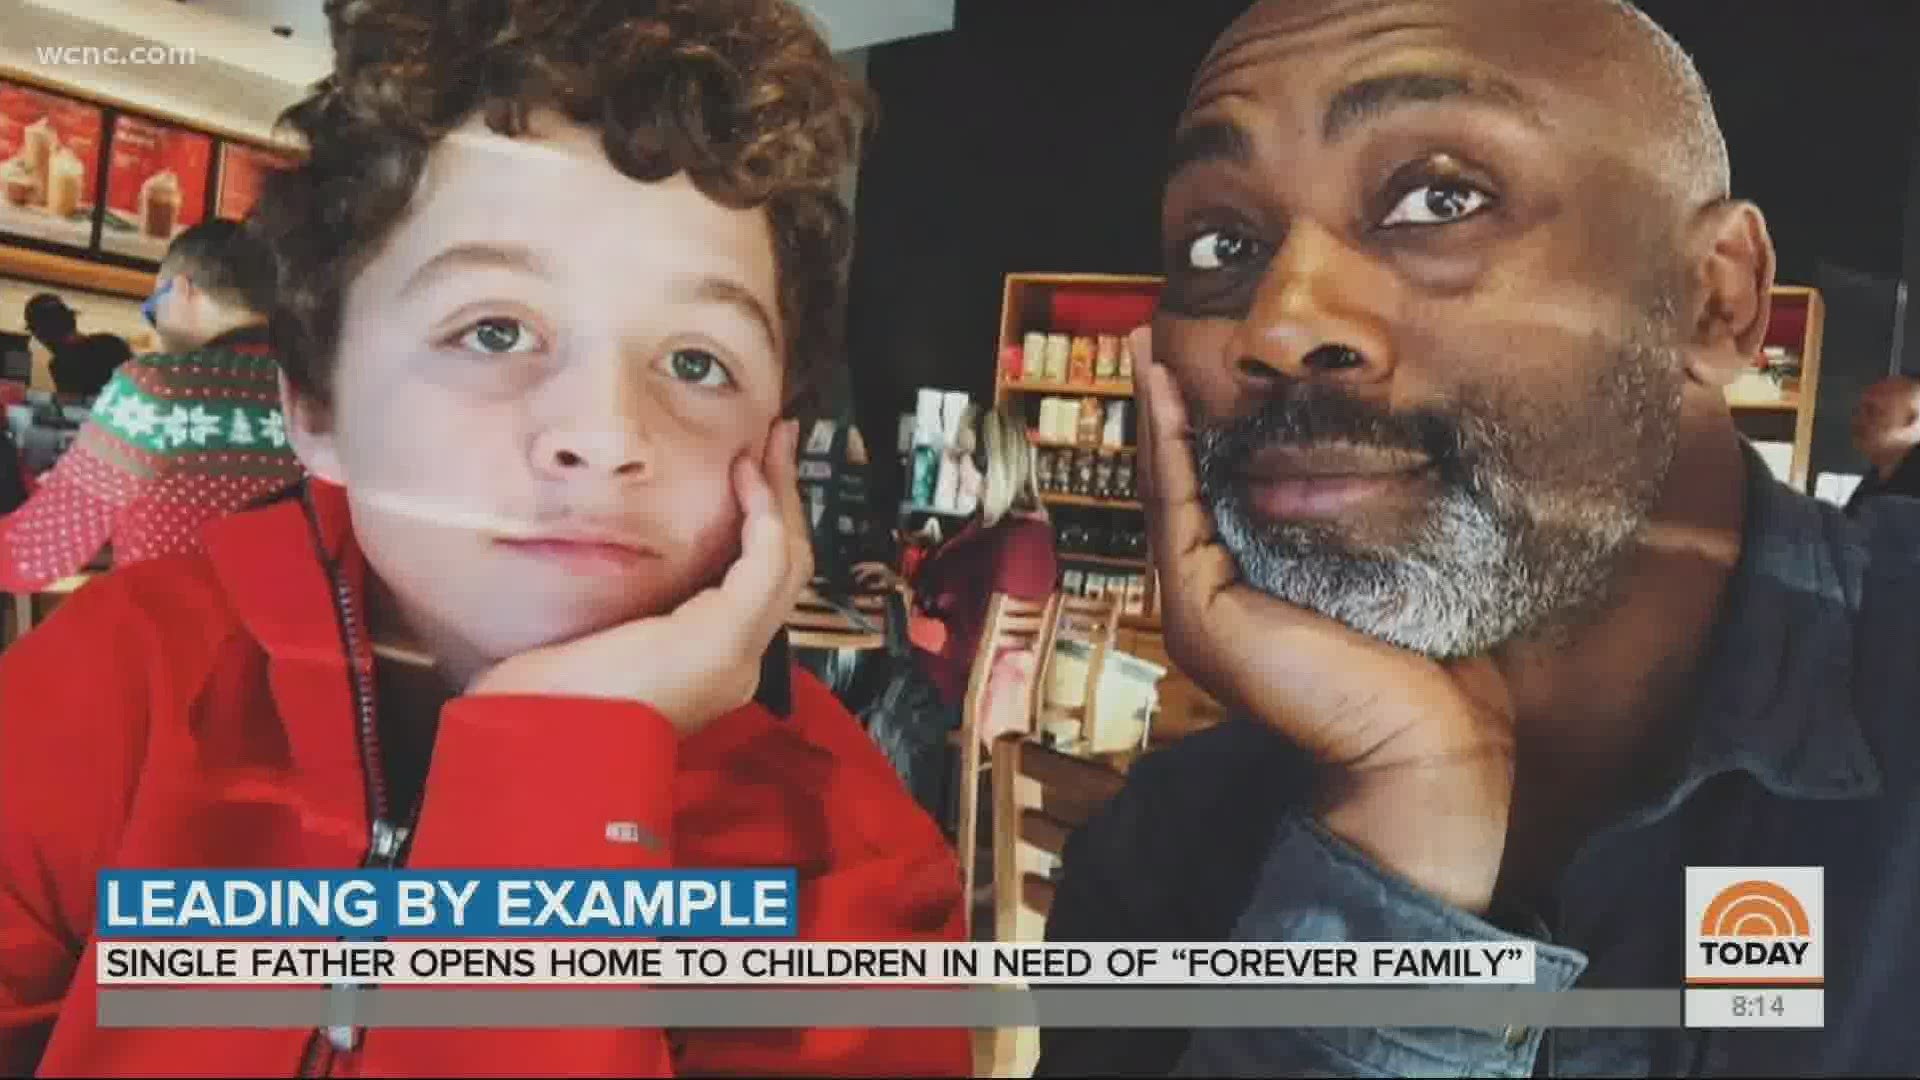 A Charlotte man has been helping kids in need for years. He's fostered 13 children in total and shared his experience with Hoda Kotb of the TODAY Show.